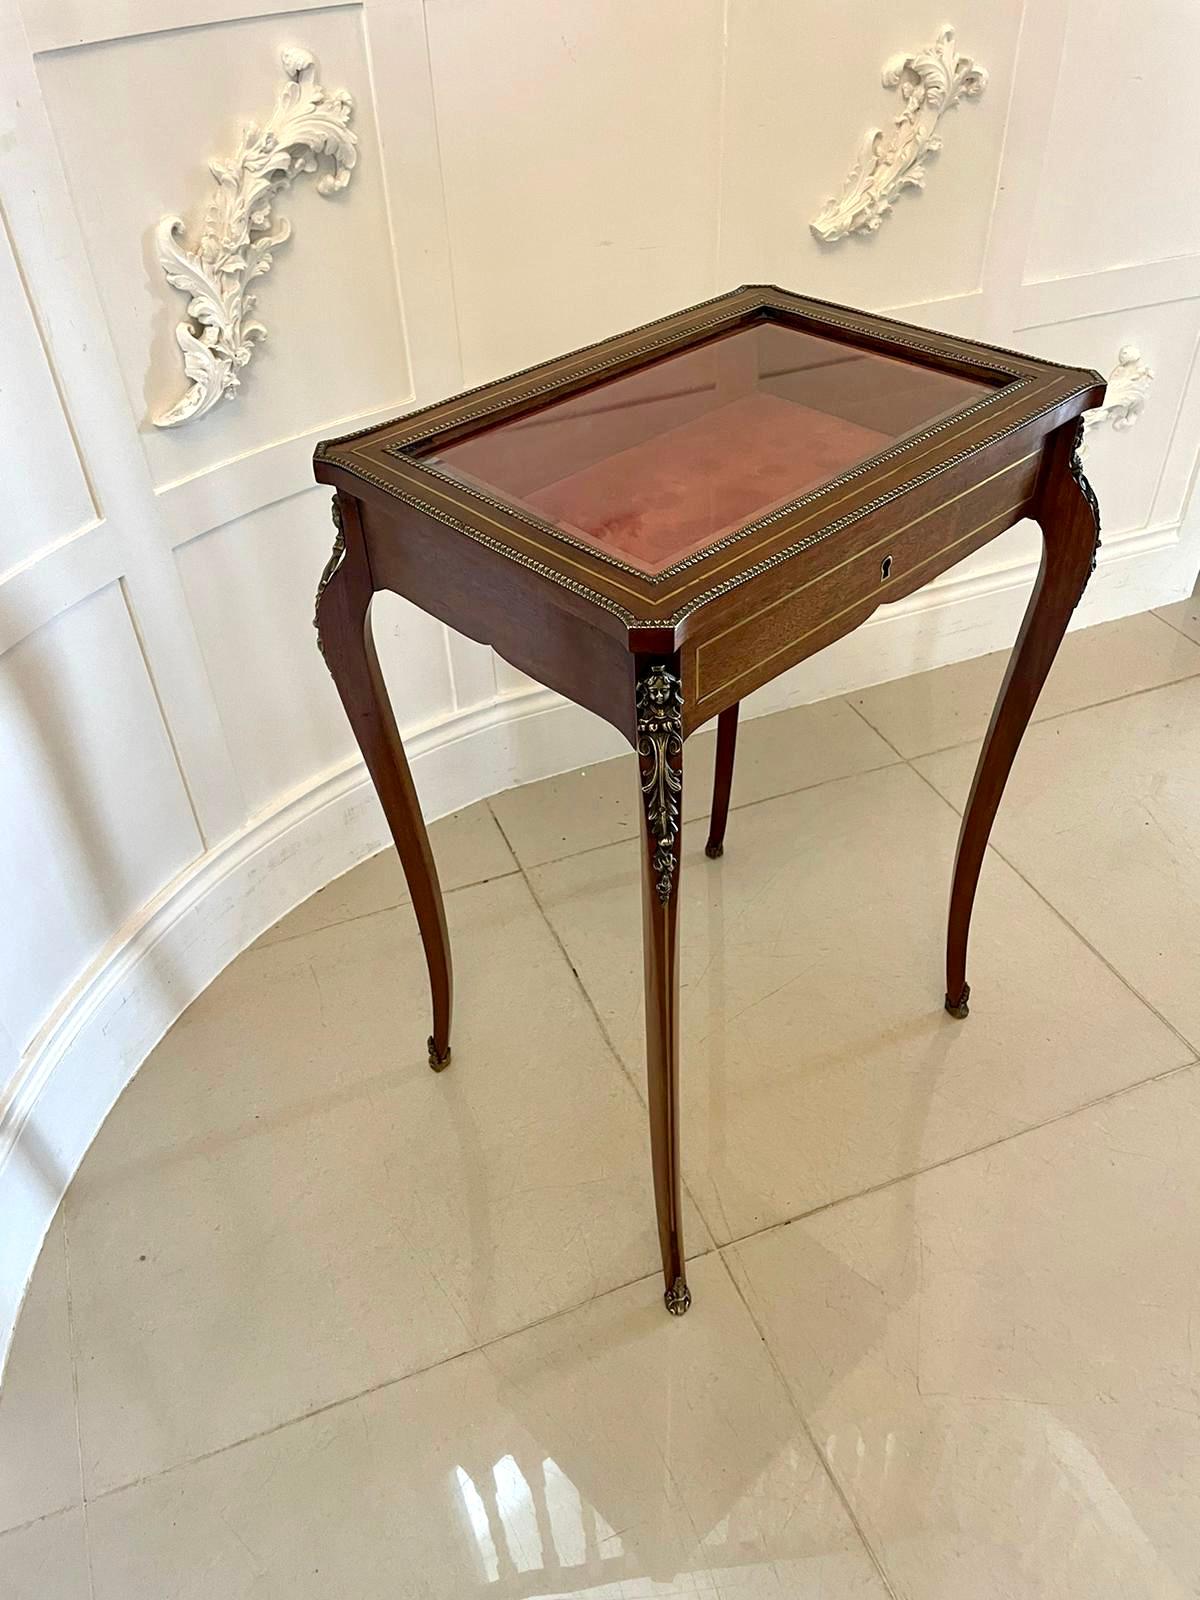 Antique 19th century French quality brass inlaid mahogany bijouterie cabinet having a quality mahogany brass inlaid bevelled edge, glass lift up top, shaped mahogany brass inlaid frieze standing on shaped cabriole legs with ornate ormolu mounts and